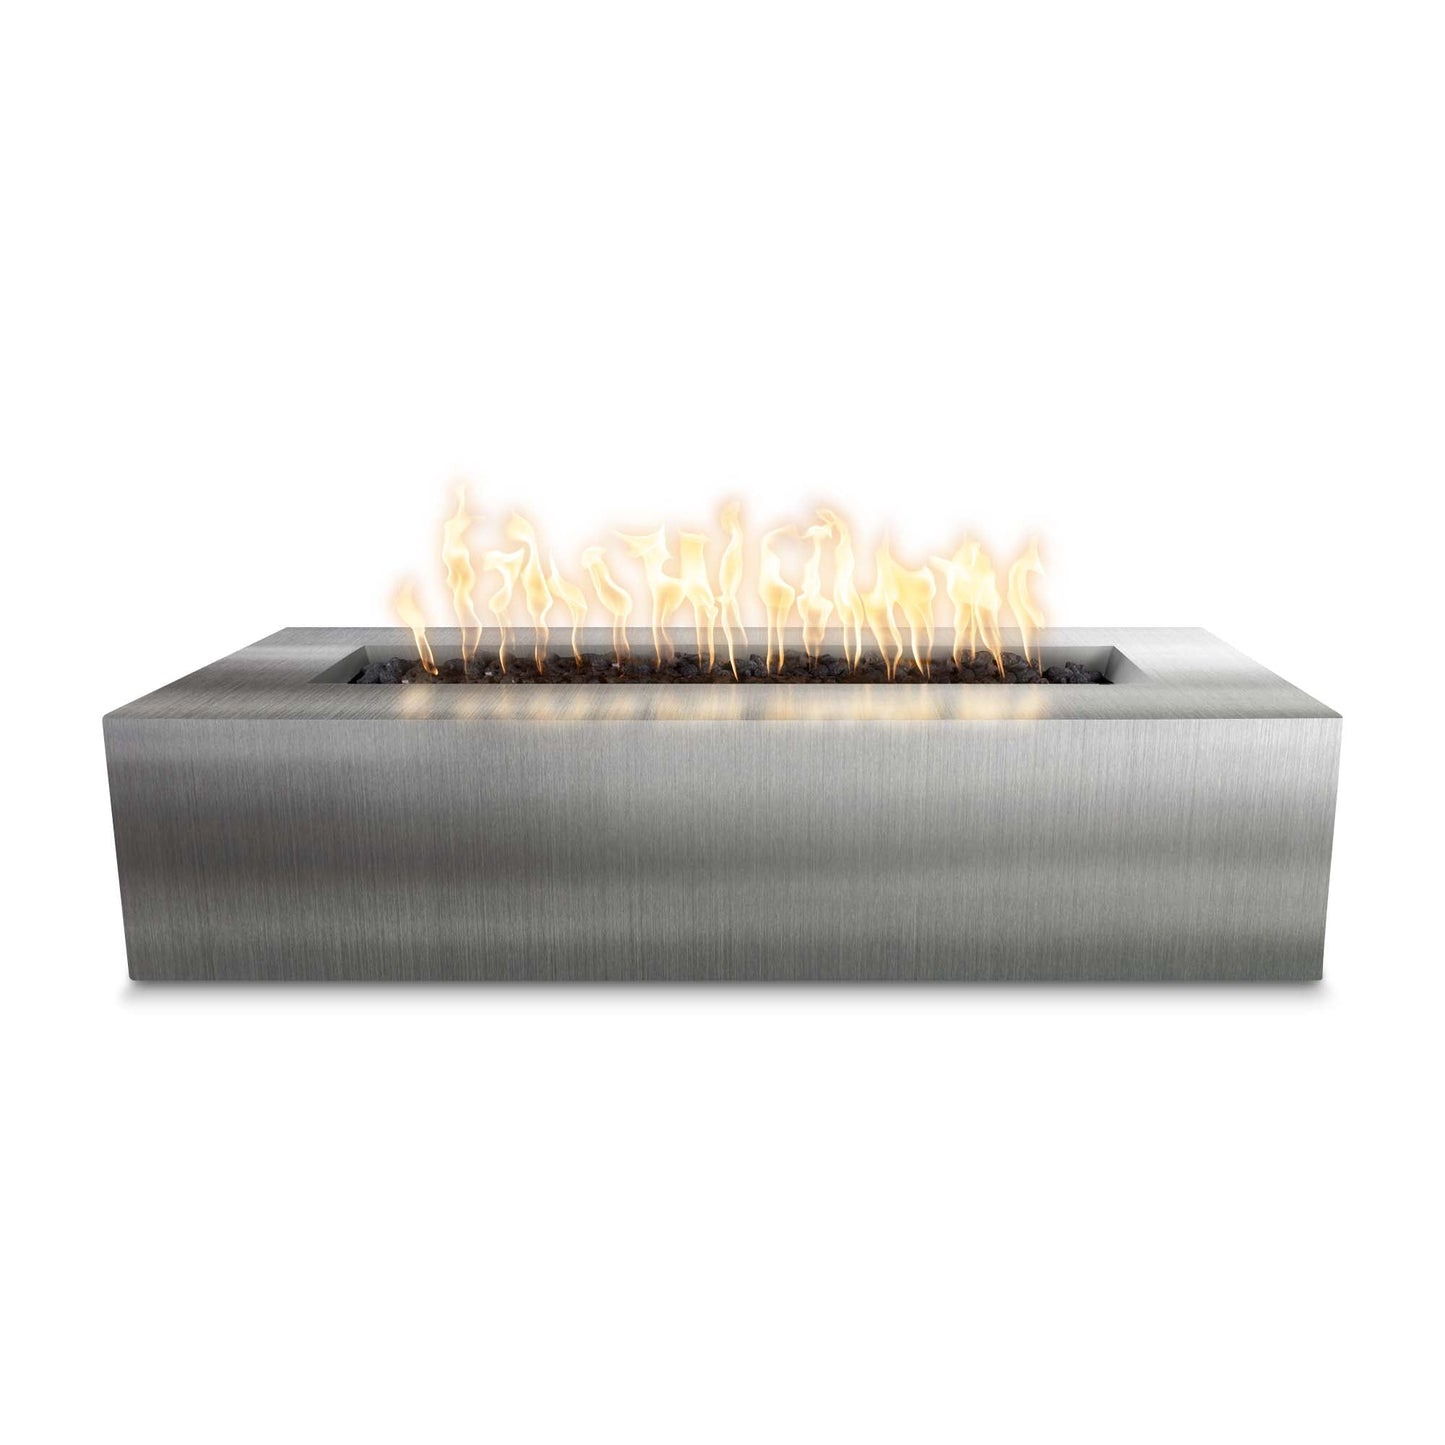 The Outdoor Plus Rectangular Regal 54" Corten Steel Natural Gas Fire Pit with 110V Electronic Ignition